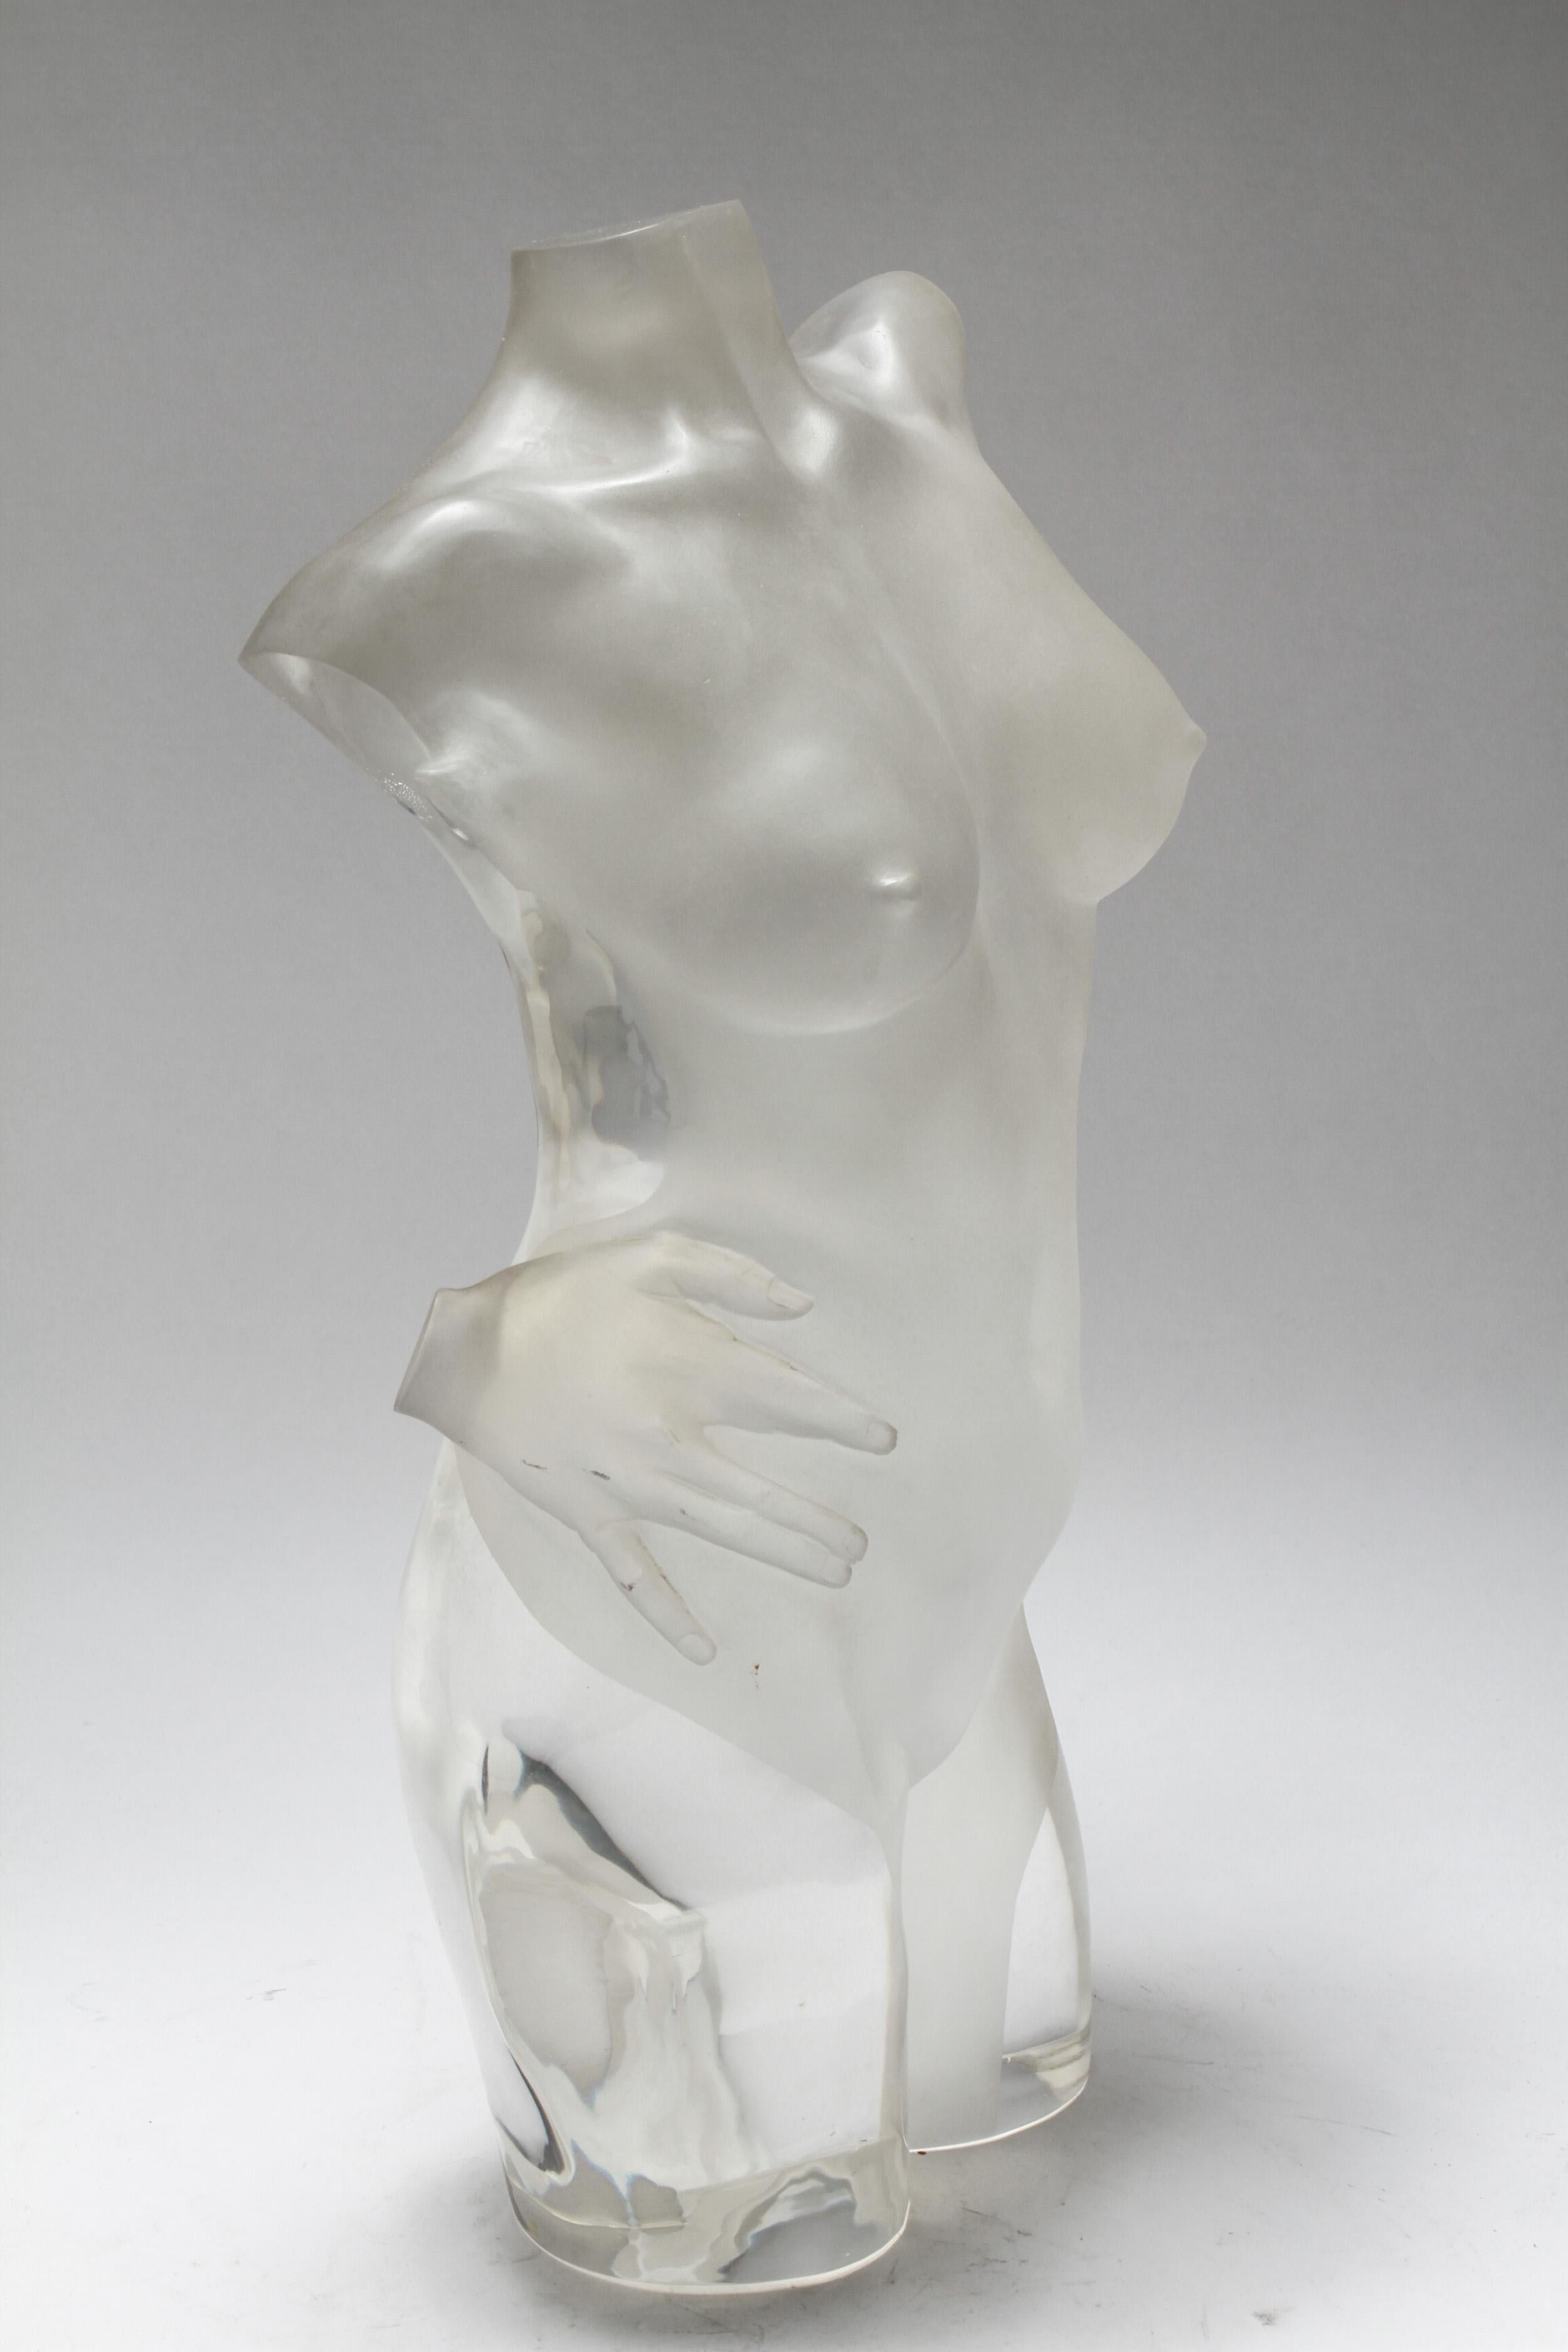 Modern acrylic sculpture of a woman's torso with a disembodied hand on her hip. The piece is made of colorless acrylic with frosted and clear motif. In great vintage condition with age-appropriate wear and use.